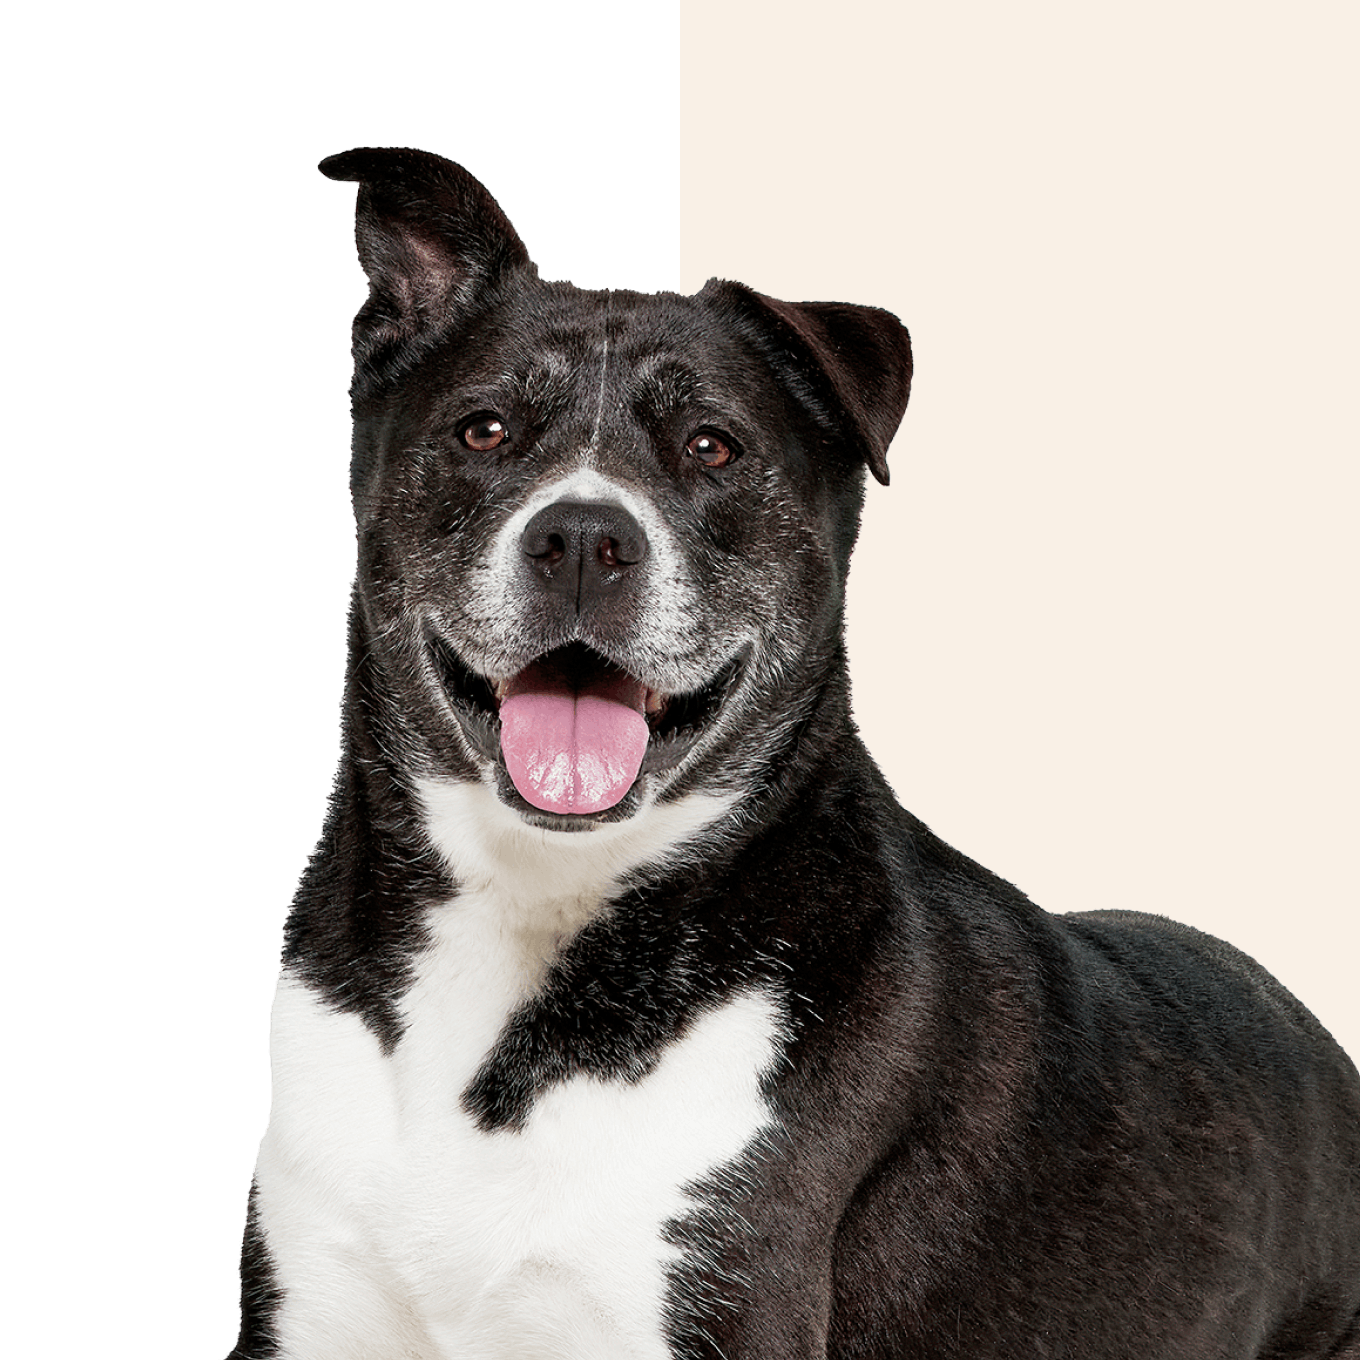 Black and white dog with one upright ear smiles and looks at the camera